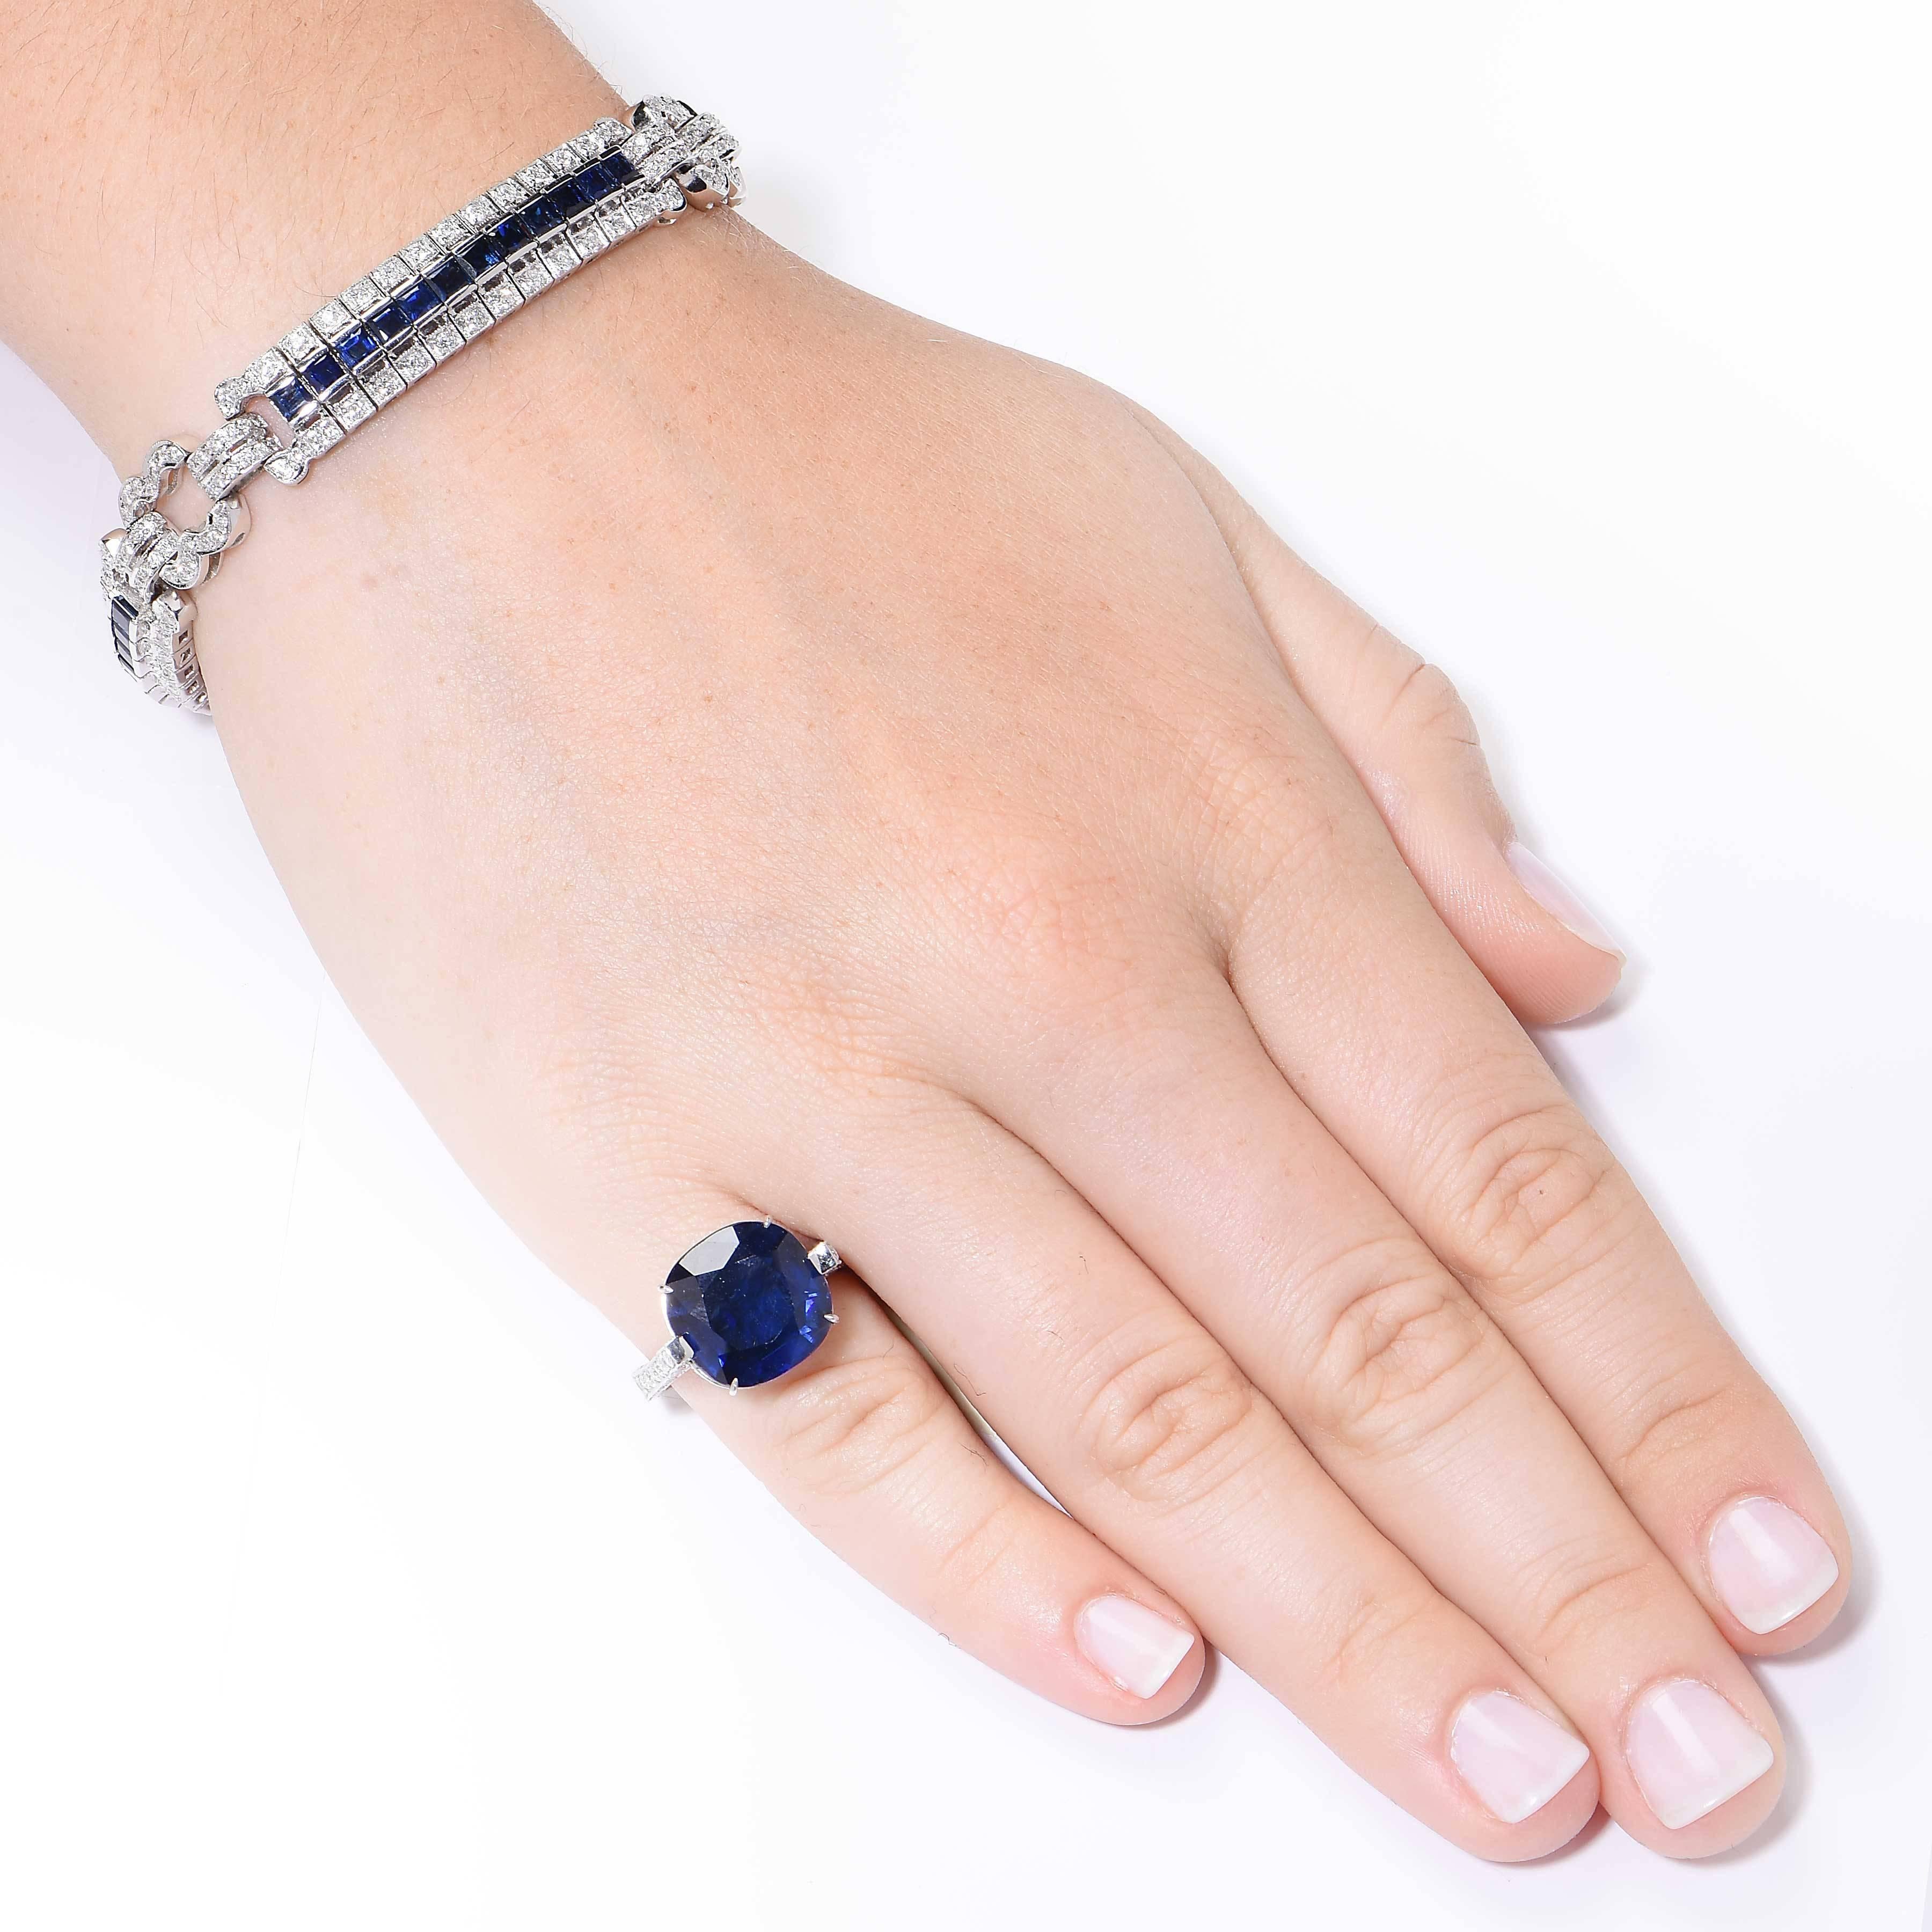 This stunning bracelet features square cut sapphires with an estimated total weight of 7.25 carats and round brilliant cut diamonds with an estimated total weight of 2.9 carats.

Length:  7 1/8 Inches
Metal Type: 18 Kt White Gold
Metal Weight: 39.1